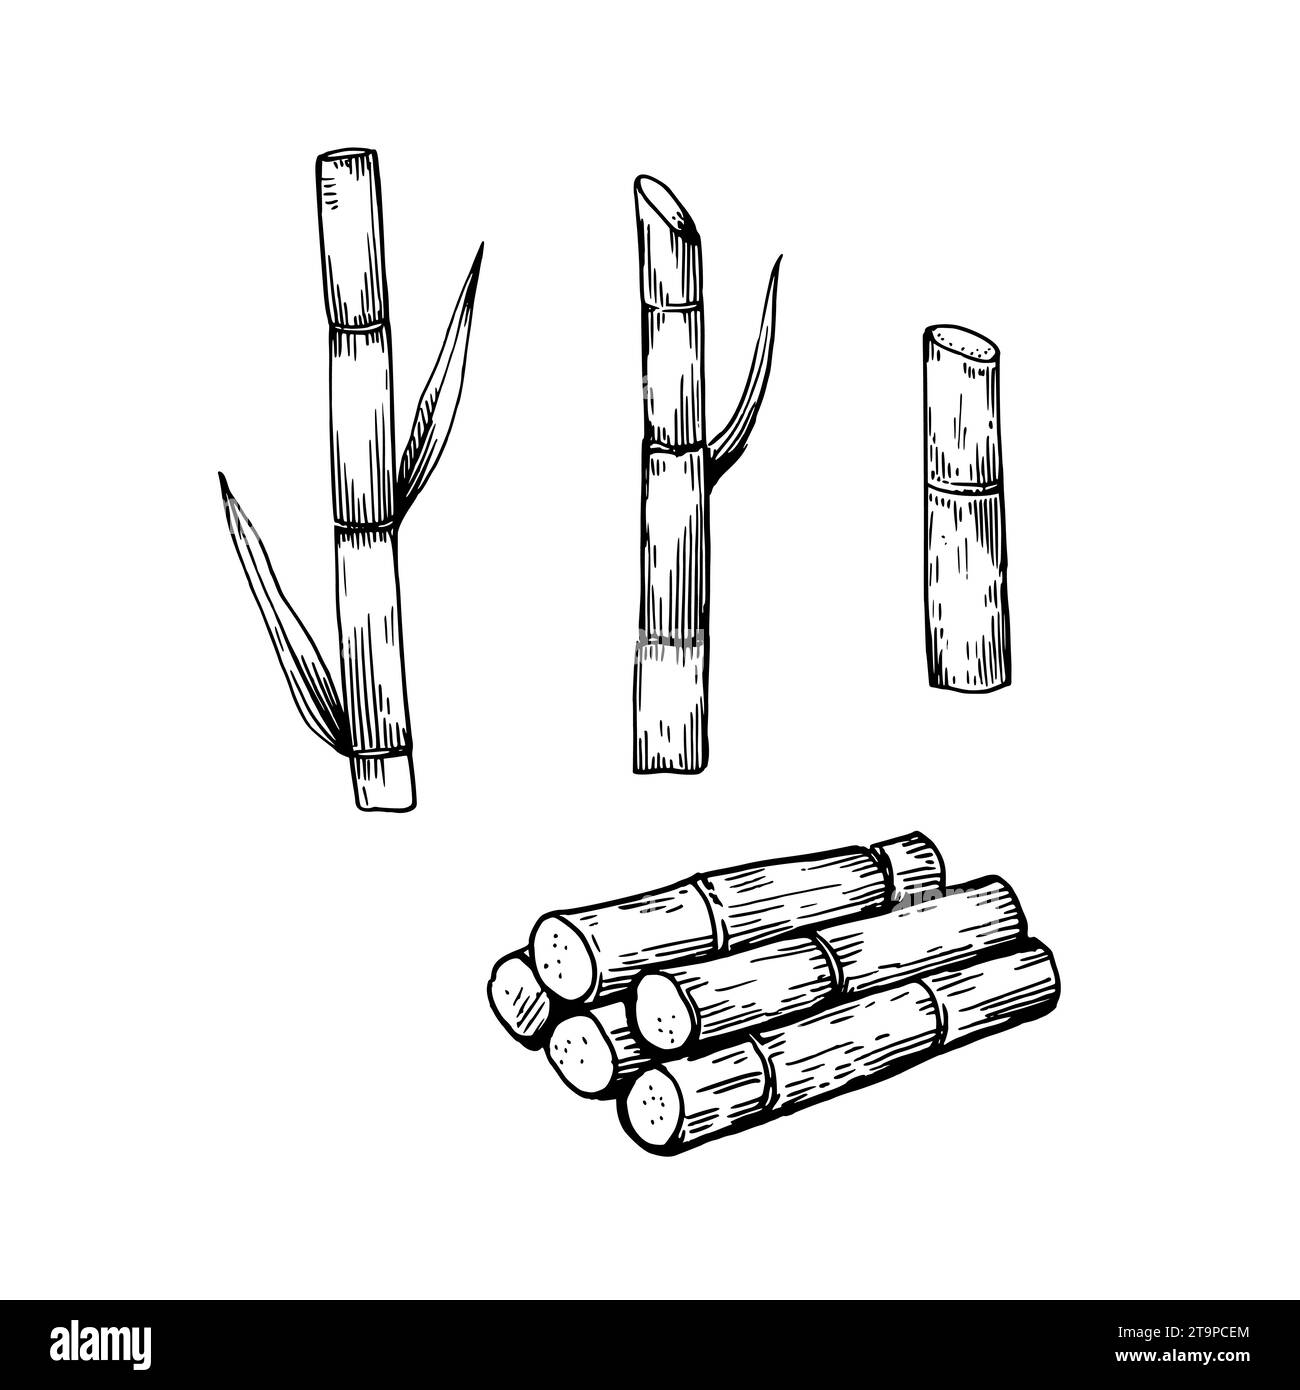 Sugar cane plants. Stems and leaves. Hand-drawn illustration in engraving retro style. Set of isolated vector design elements Stock Vector